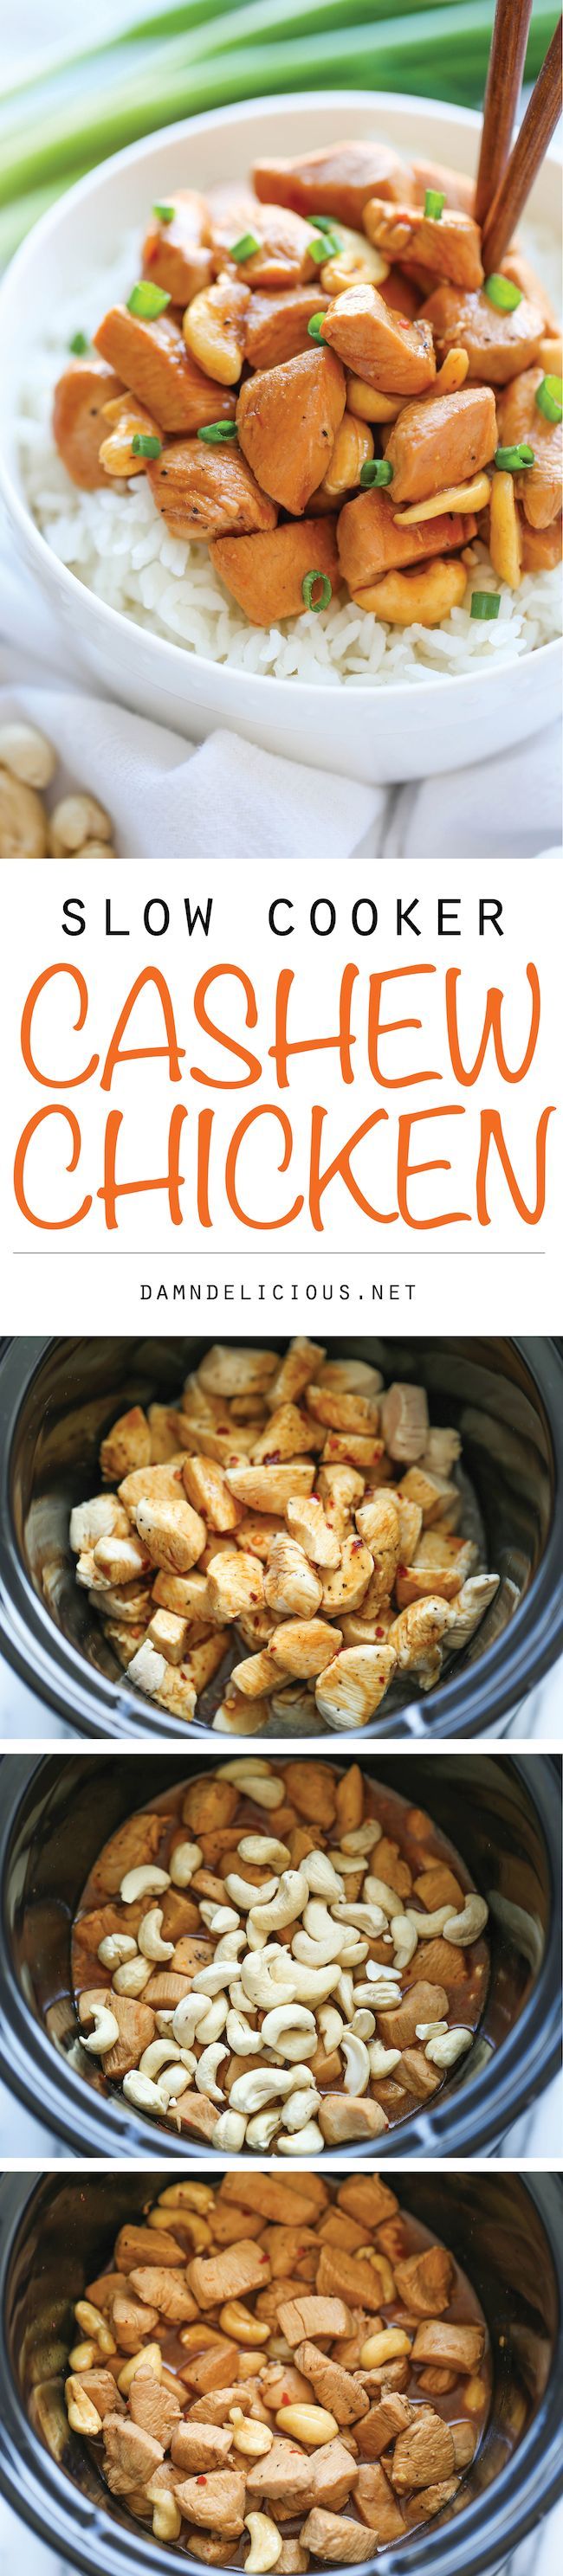 Slow Cooker Cashew Chicken – A Chinese takeout favorite made right in your crockpot. All you need is 10 mi